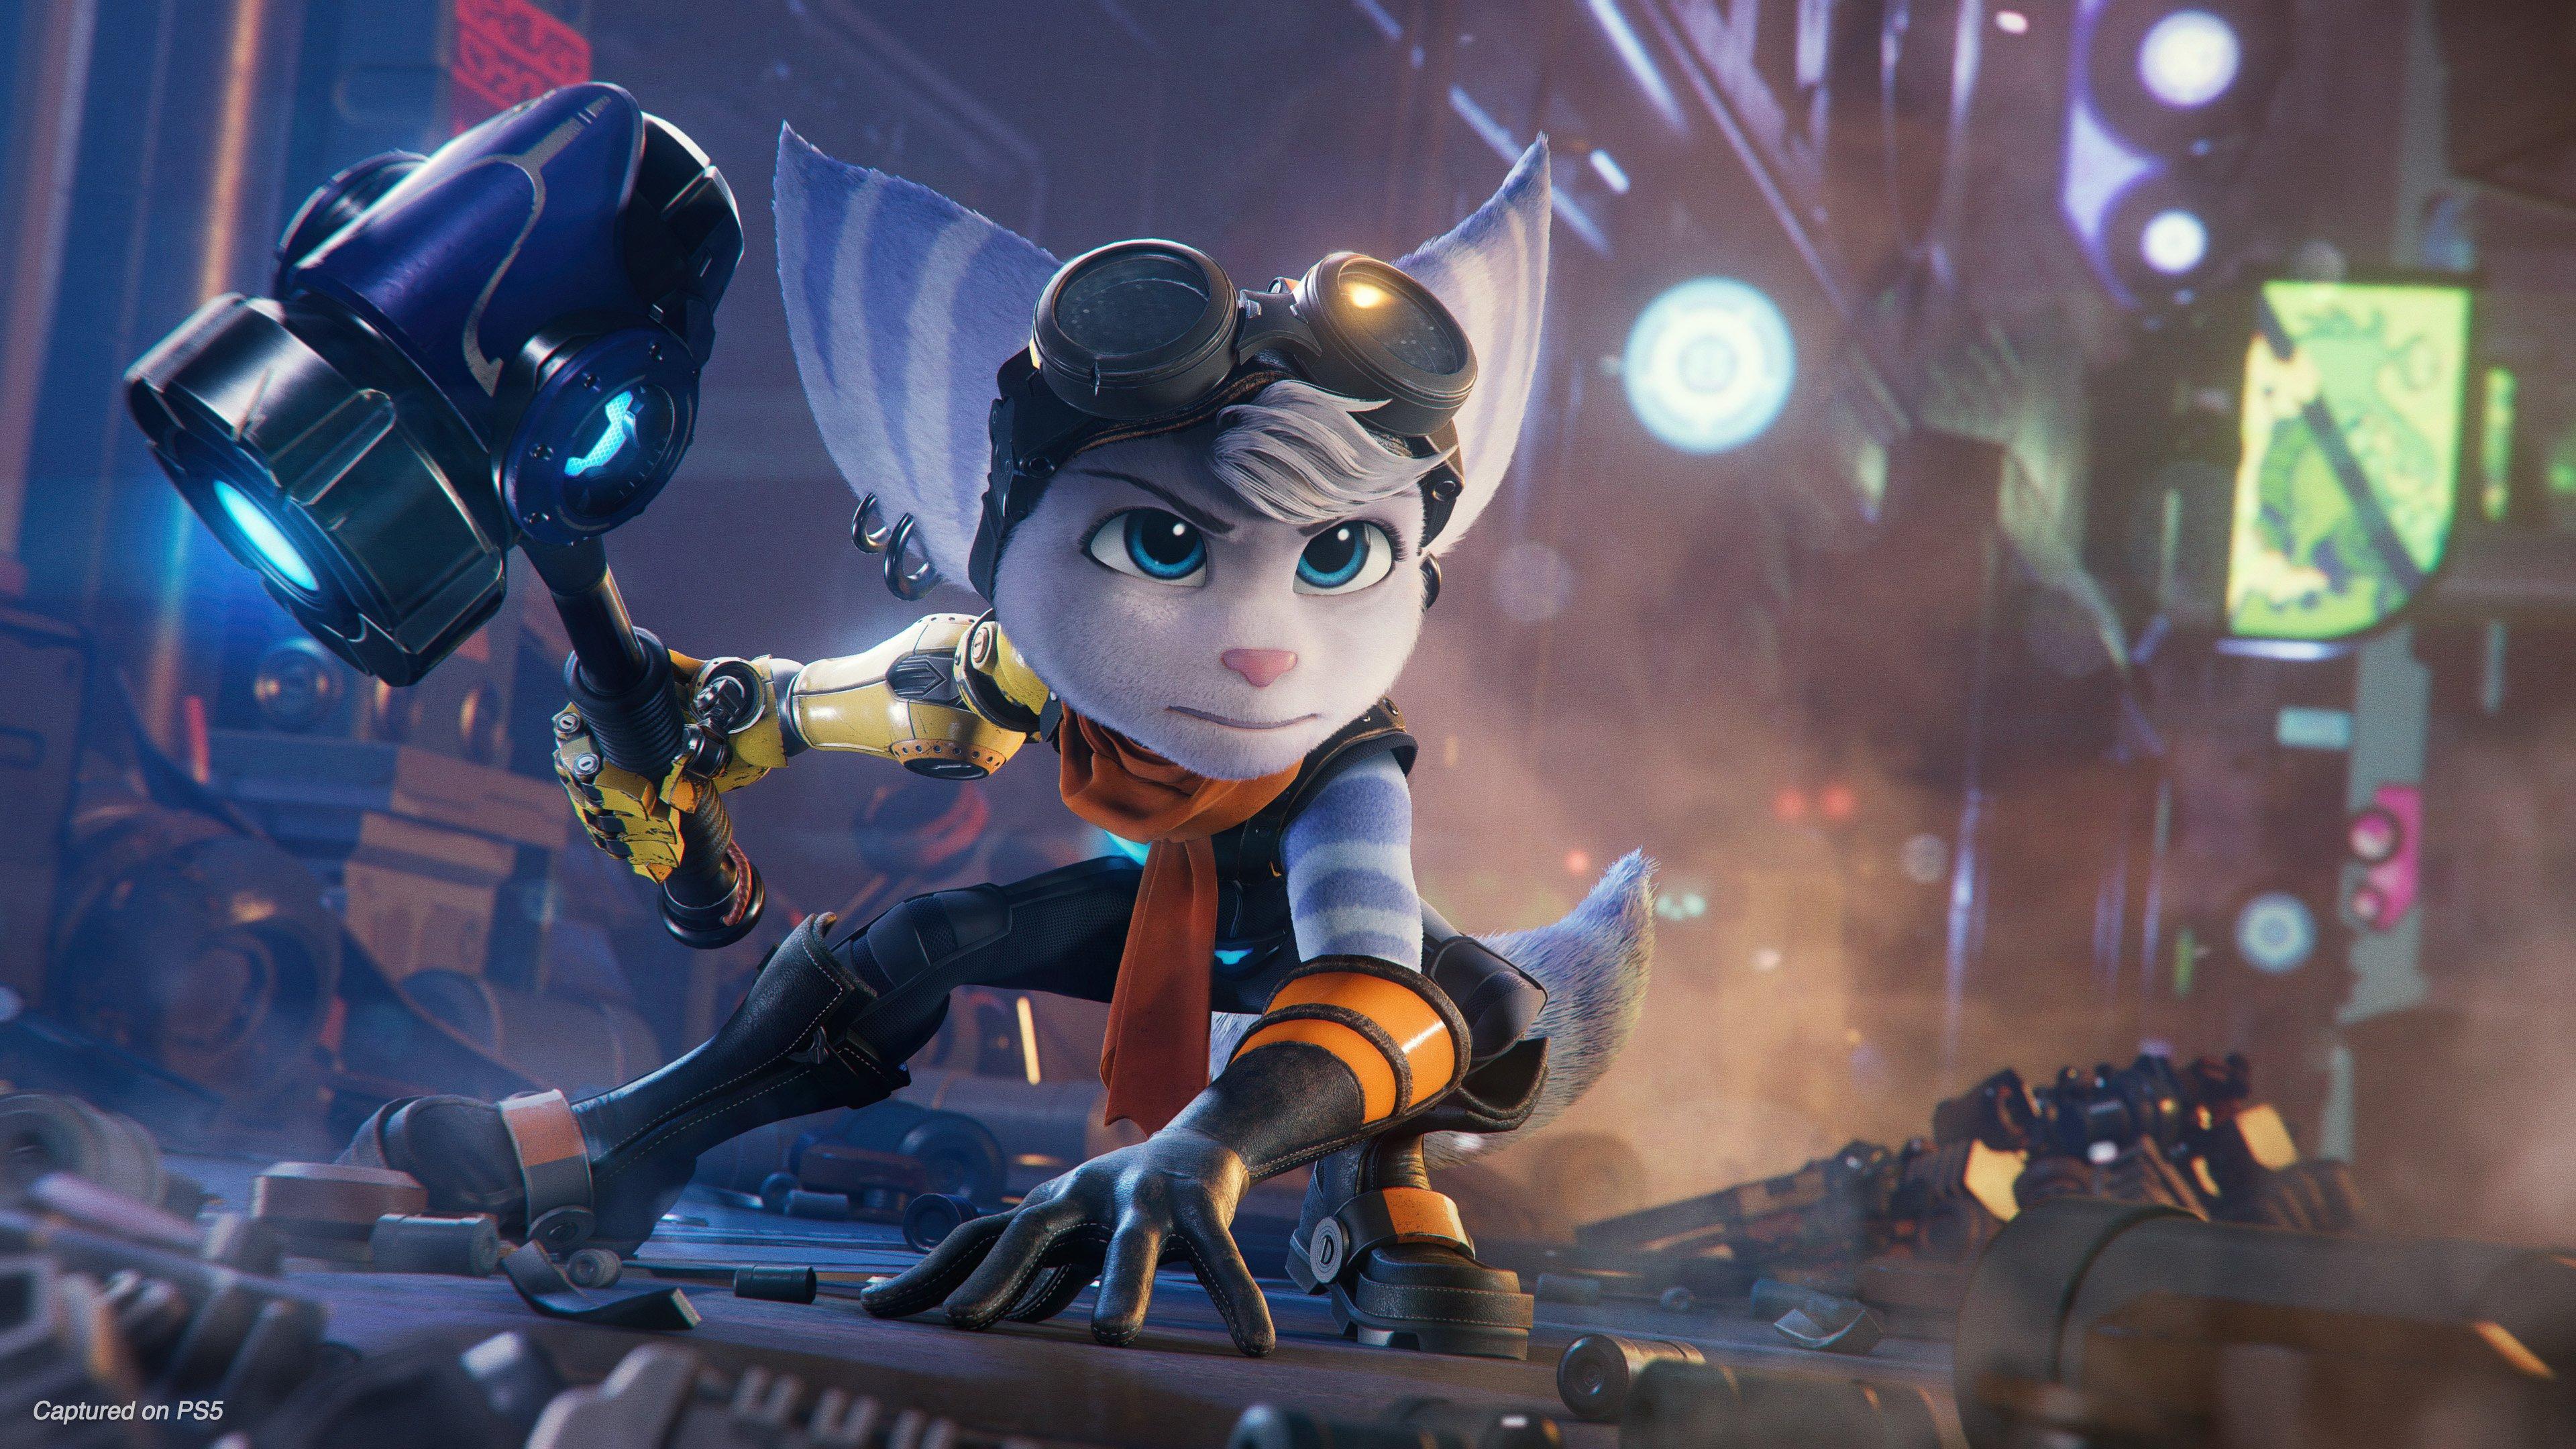 Ratchet & Clank: Rift Apart For PlayStation 5 - Pro-distributing